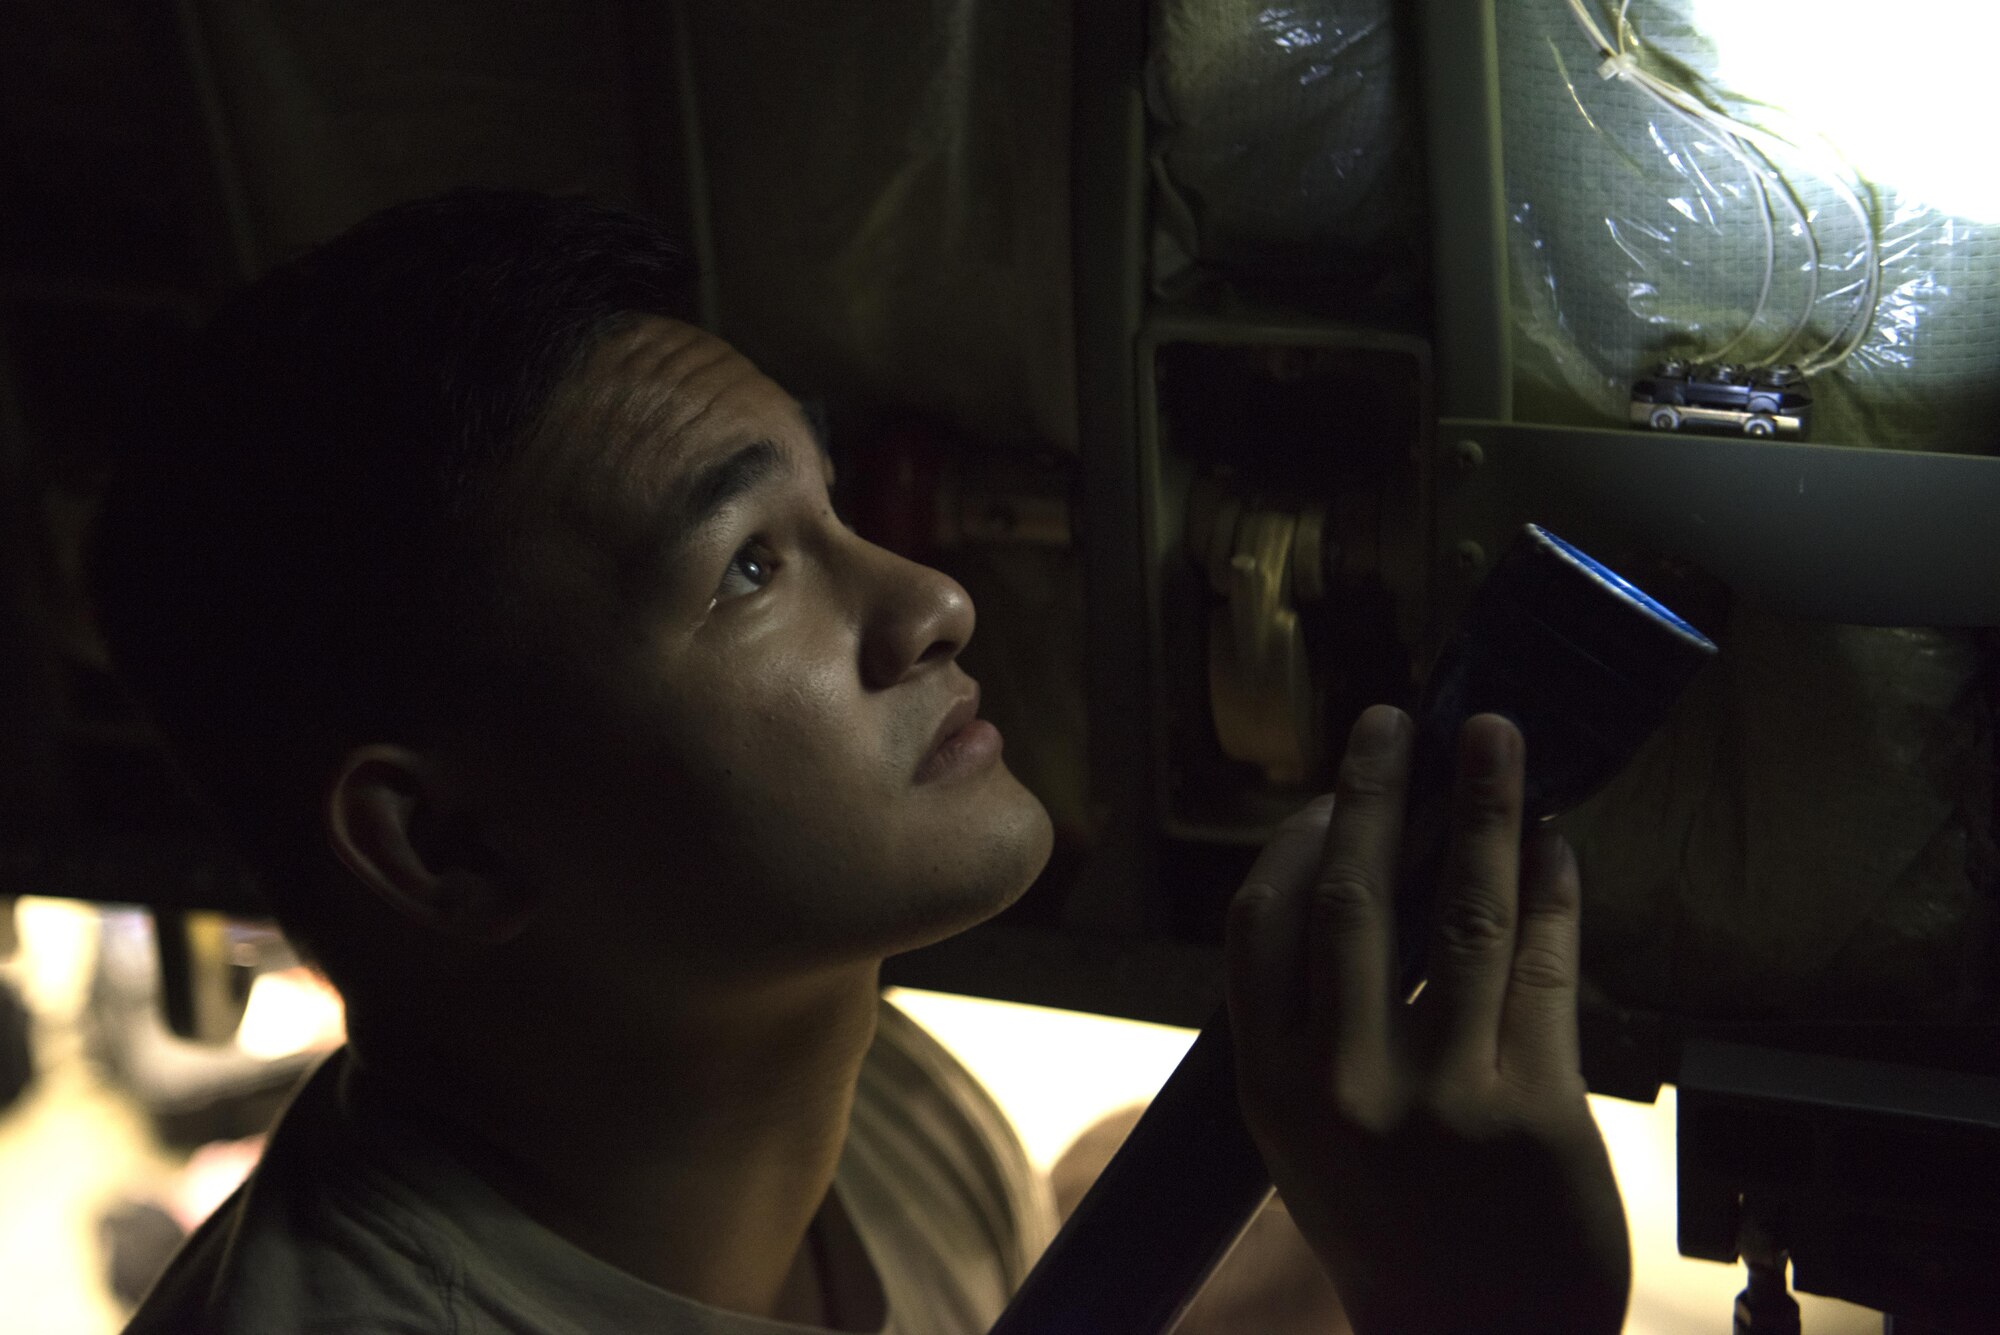 U.S. Air Force Senior Airman Joshua Dayrit, 86th Aircraft Maintenance Squadron C-130J Super Hercules crew chief, shines a flashlight at a broken aircraft part on Ramstein Air Base, Germany, Oct. 13, 2017. Crew chiefs are responsible for general maintenance and repairs on aircraft. (U.S. Air Force photo by Airman 1st Class Devin M. Rumbaugh)